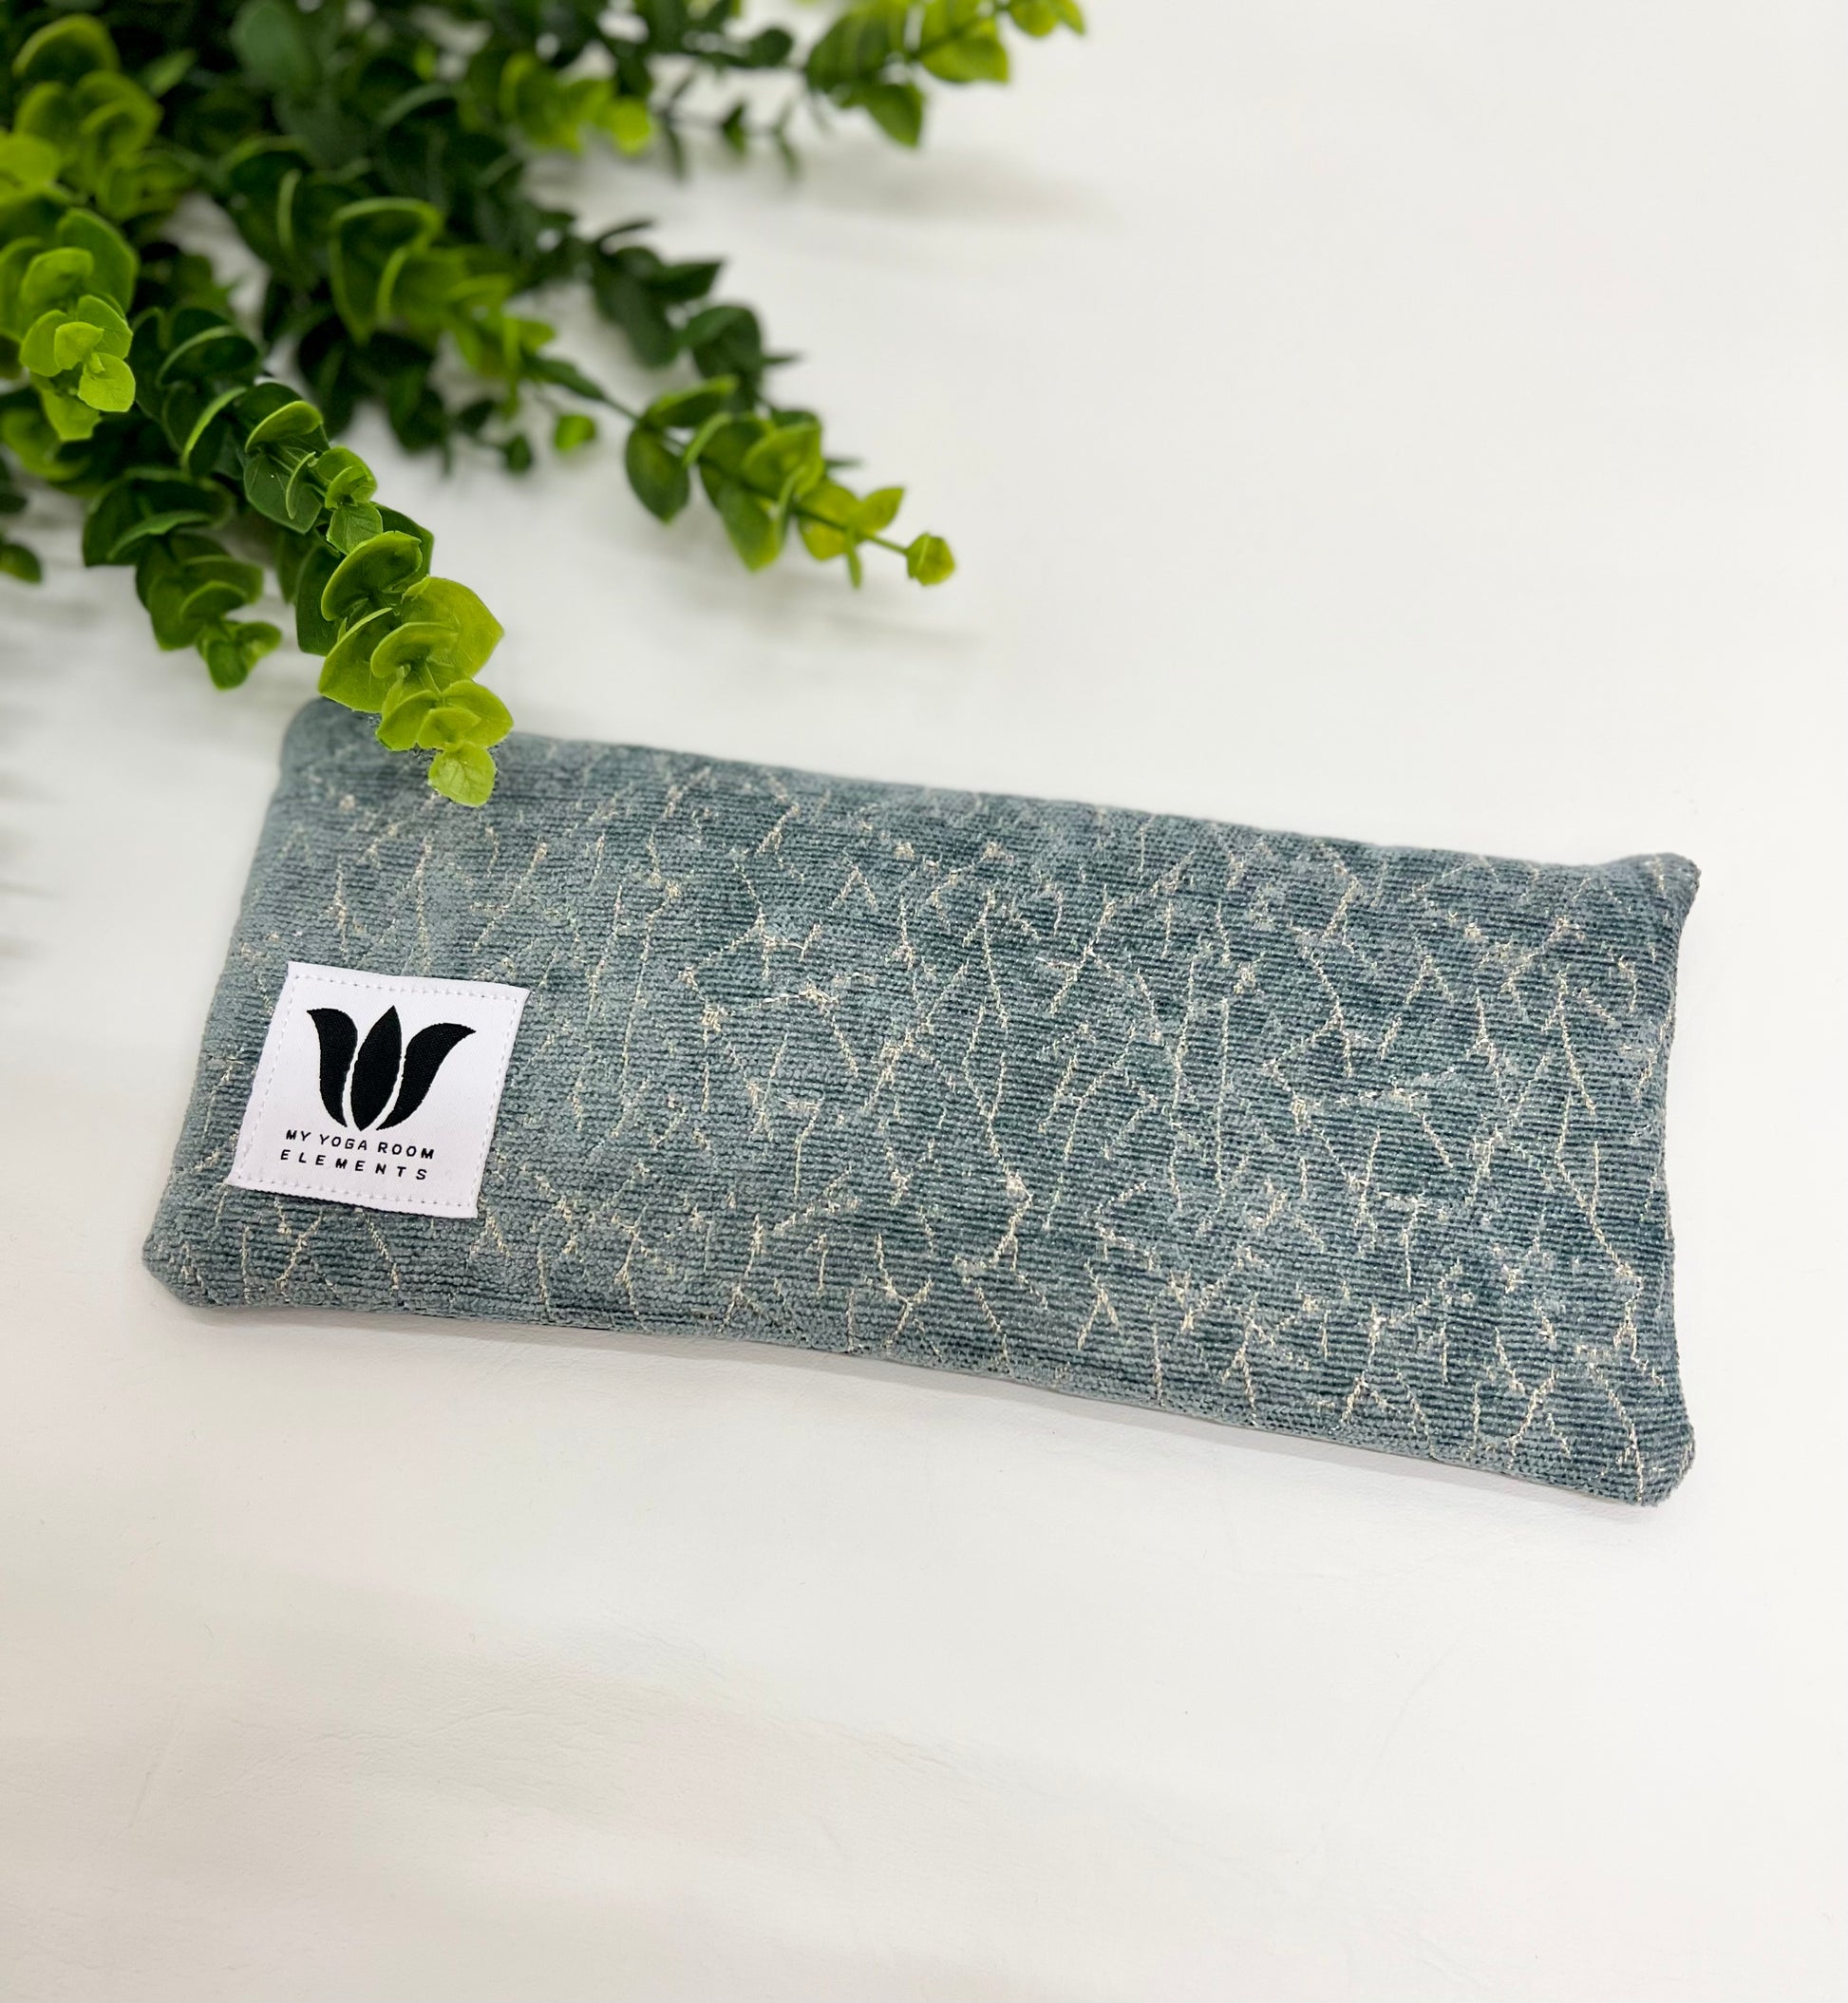 Yoga eye pillow, unscented, therapeutically weighted to soothe eye strain and stress or enhance your savasana. Handcrafted in Canada by My Yoga Room Elements. Sage and silver subtle print and bamboo fabric.